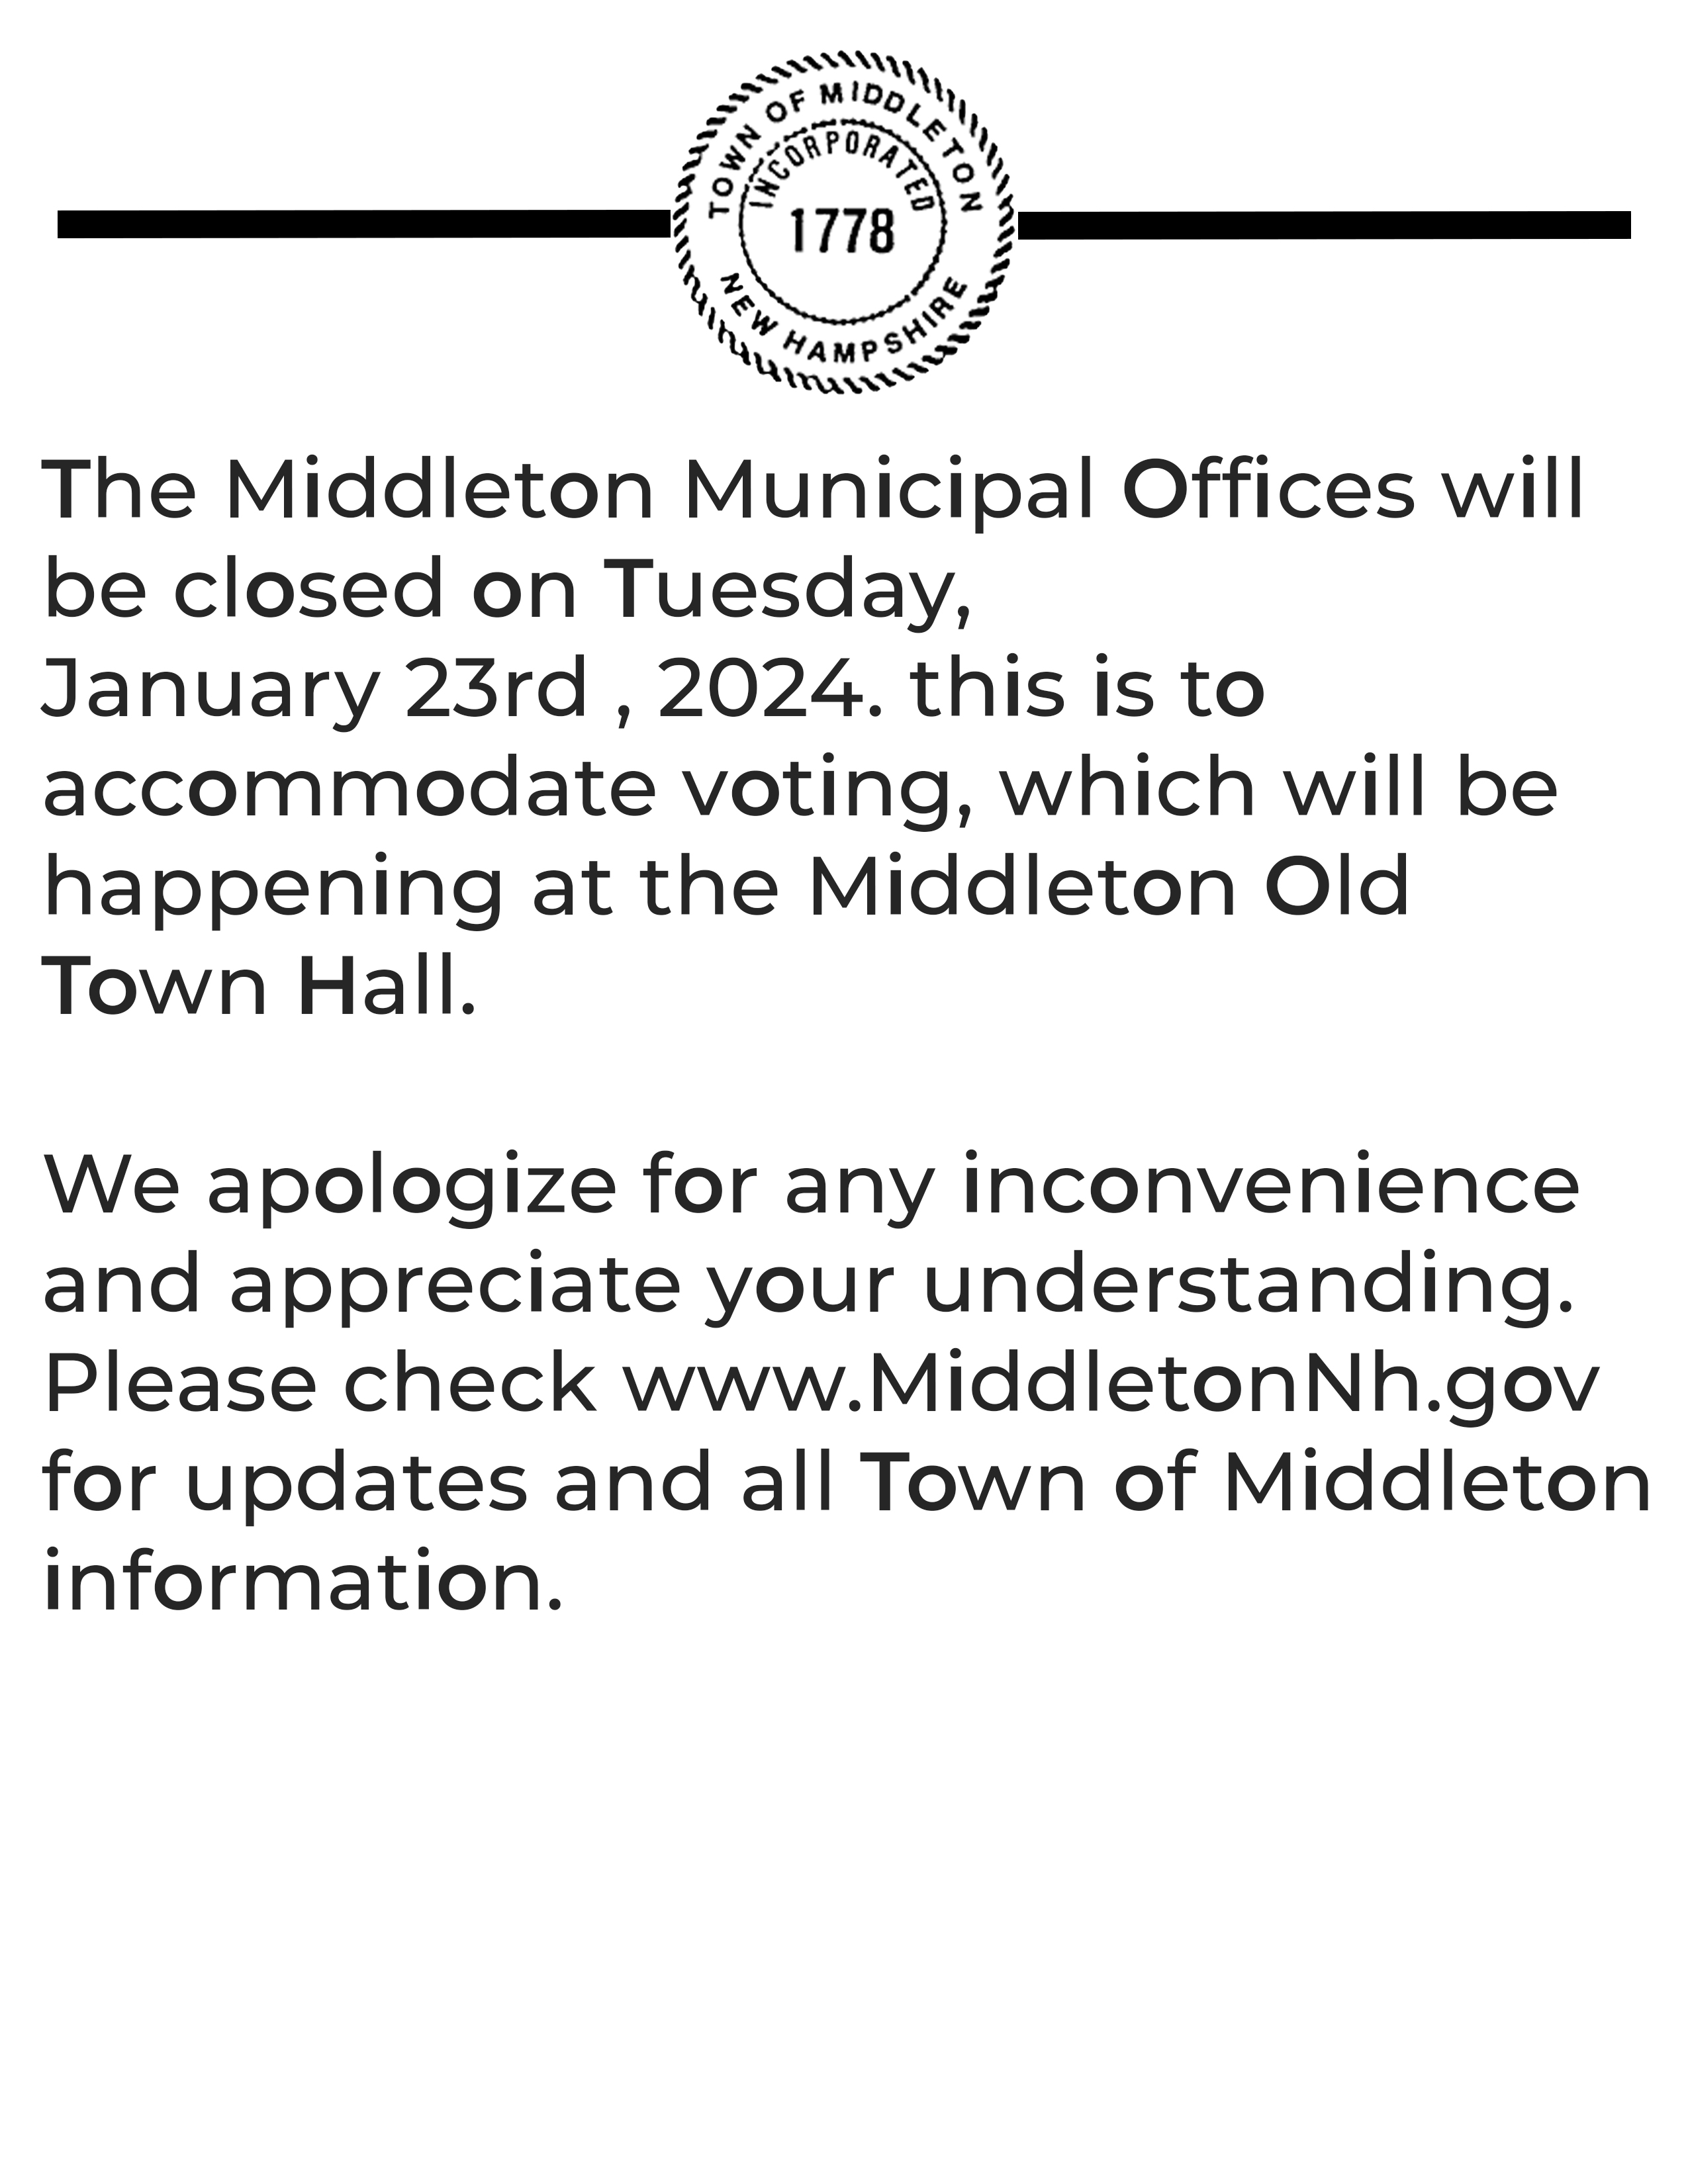 On Tuesday,  January 23rd , 2024 The Middleton Municipal Offices will  be closed 